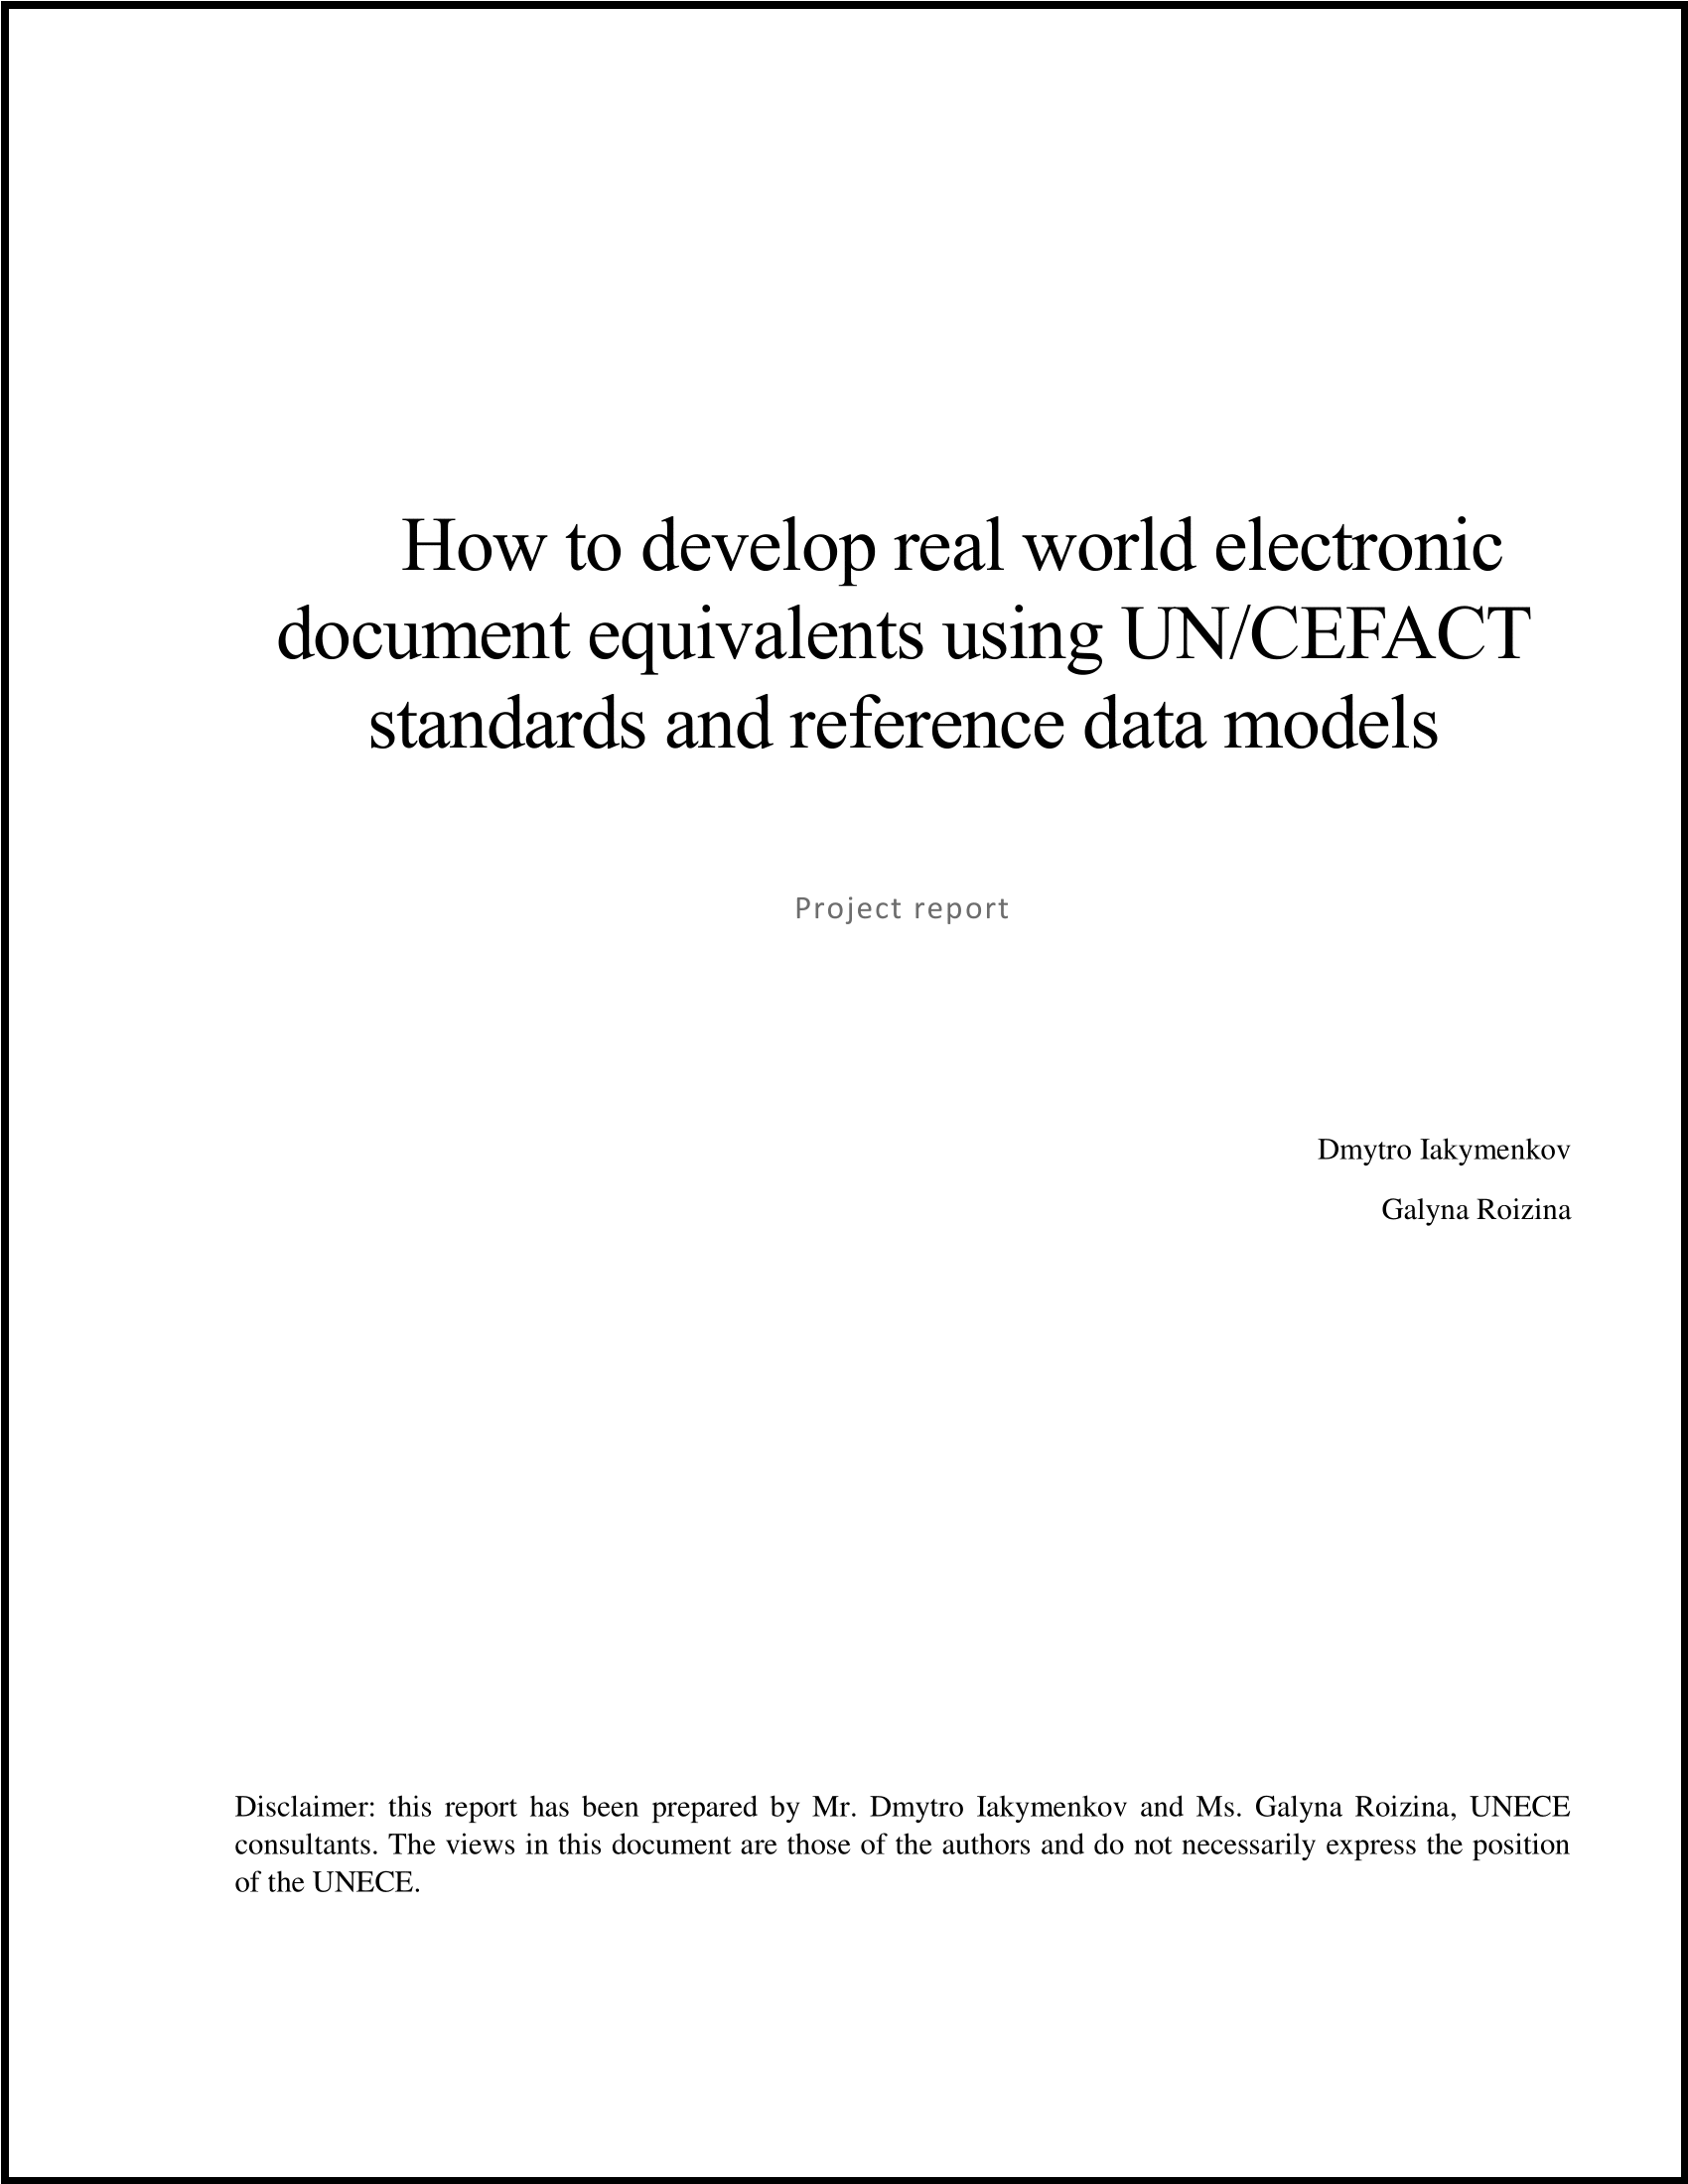 How to develop transport e-docs using UNCEFACT standards and MMT RDM